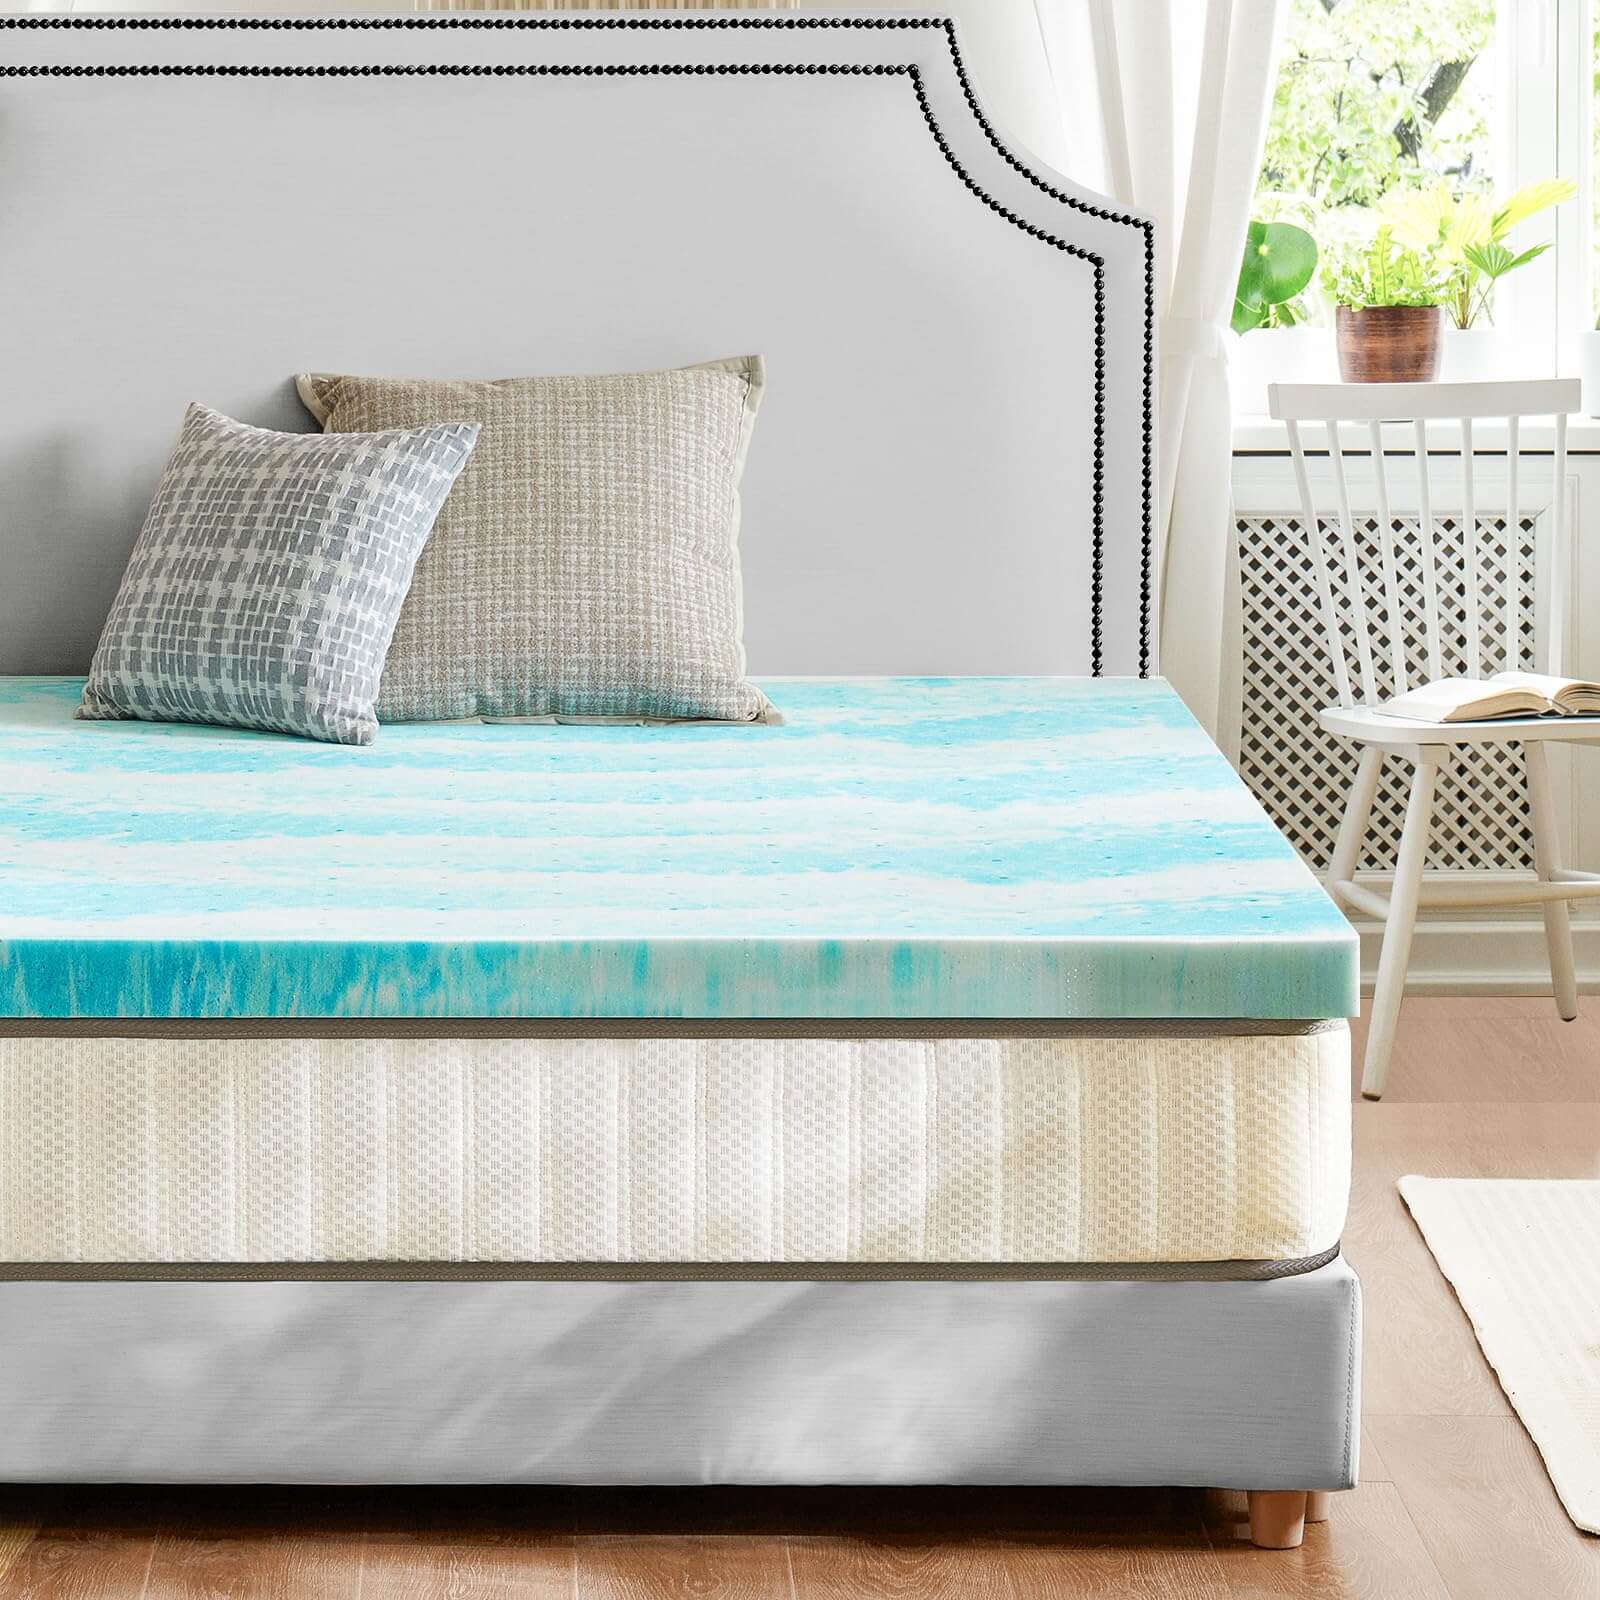 memory-foam-bed-topper#Style_3 Inches#Size_Queen